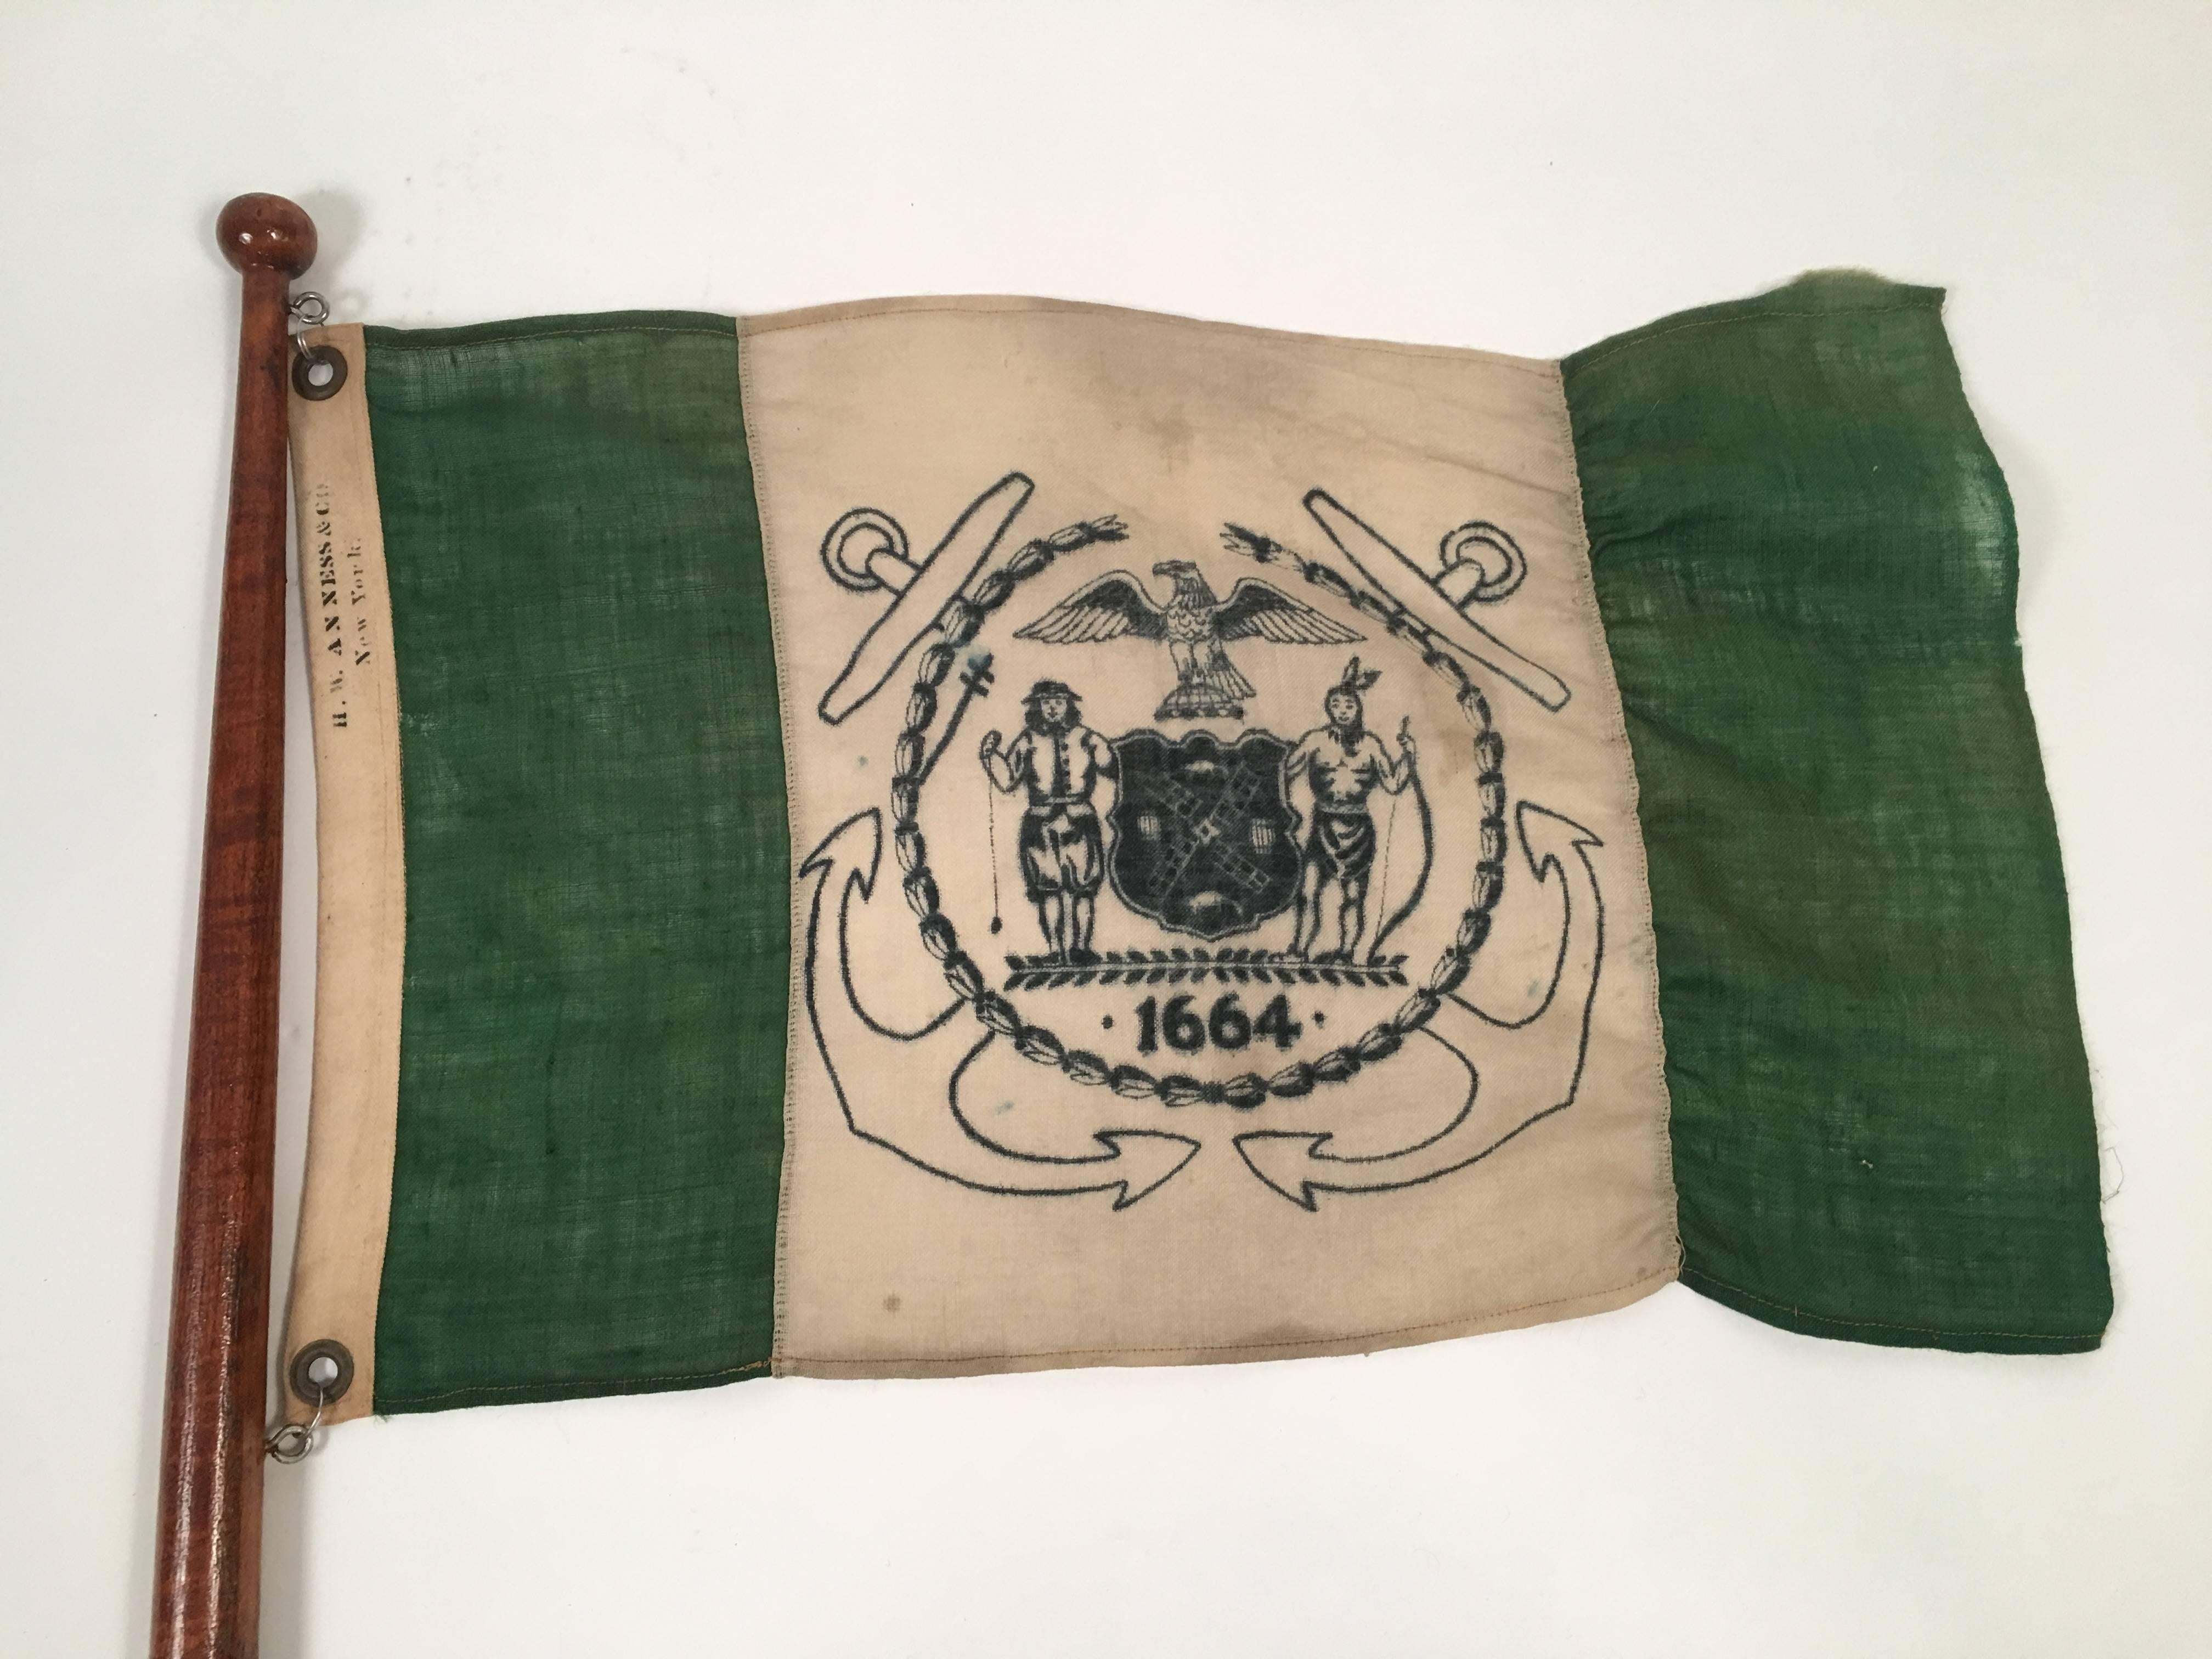 A green and white linen/cotton burgee on a mahogany standard with ball finial, with the seal of New York City printed in blue on white in the middle and flanked by green panels on each side with the flag maker's name stenciled in black on the edge,